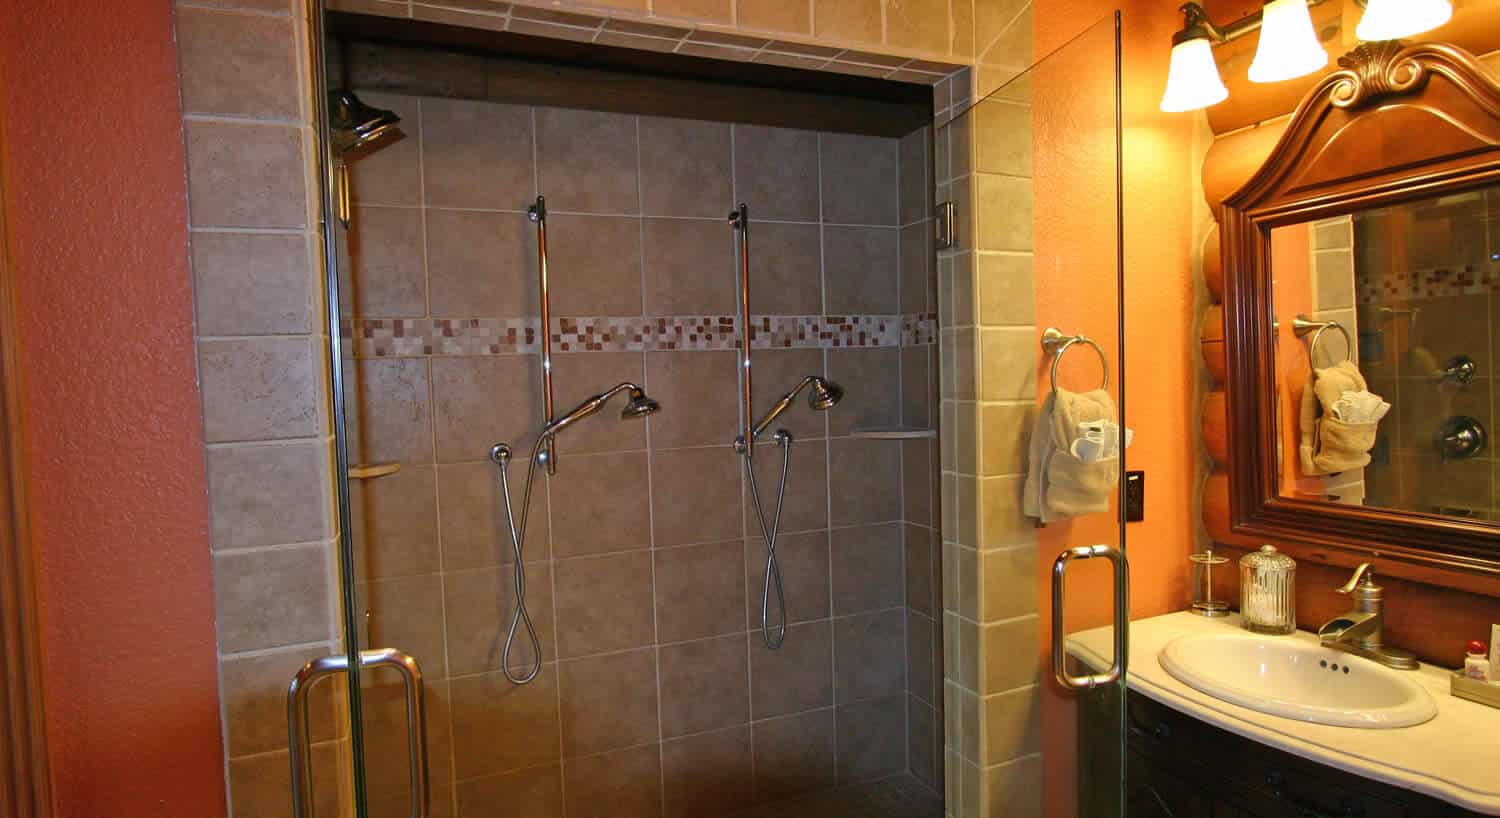 Custom shower enclosure with multiple shower heads in bathroom. 